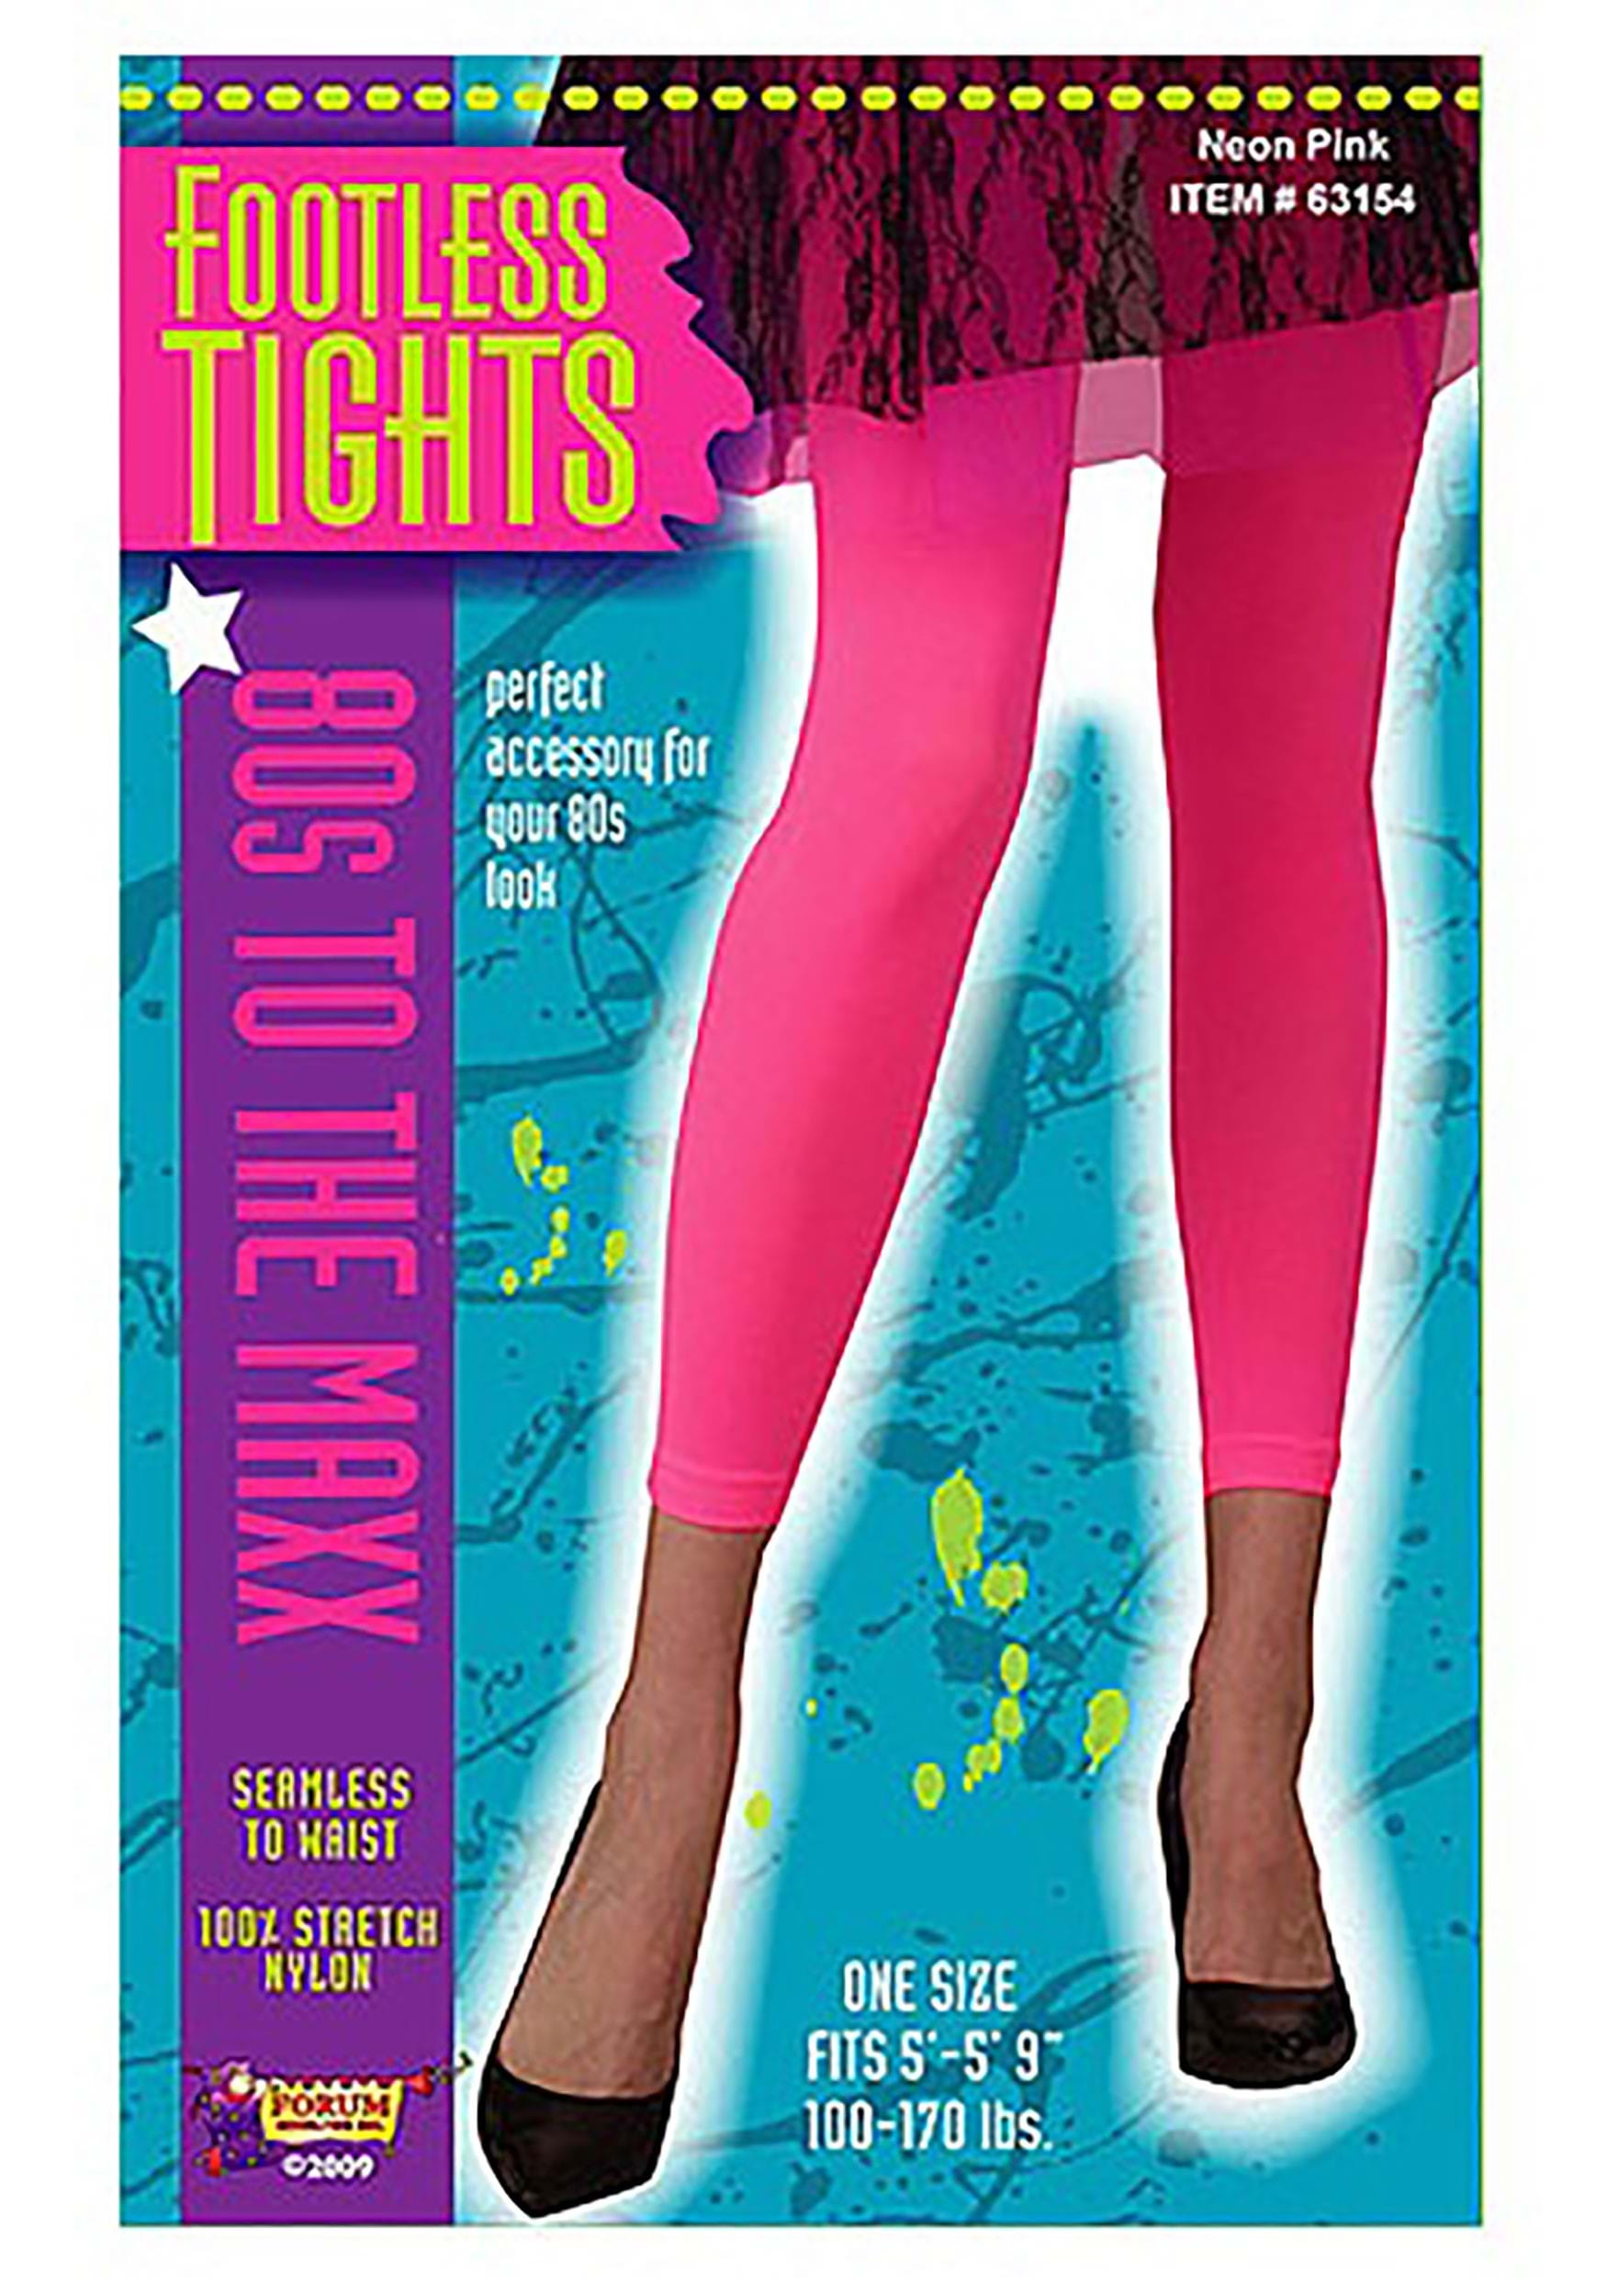 Shredded Neon Pink Footless 1980s Costume Tights